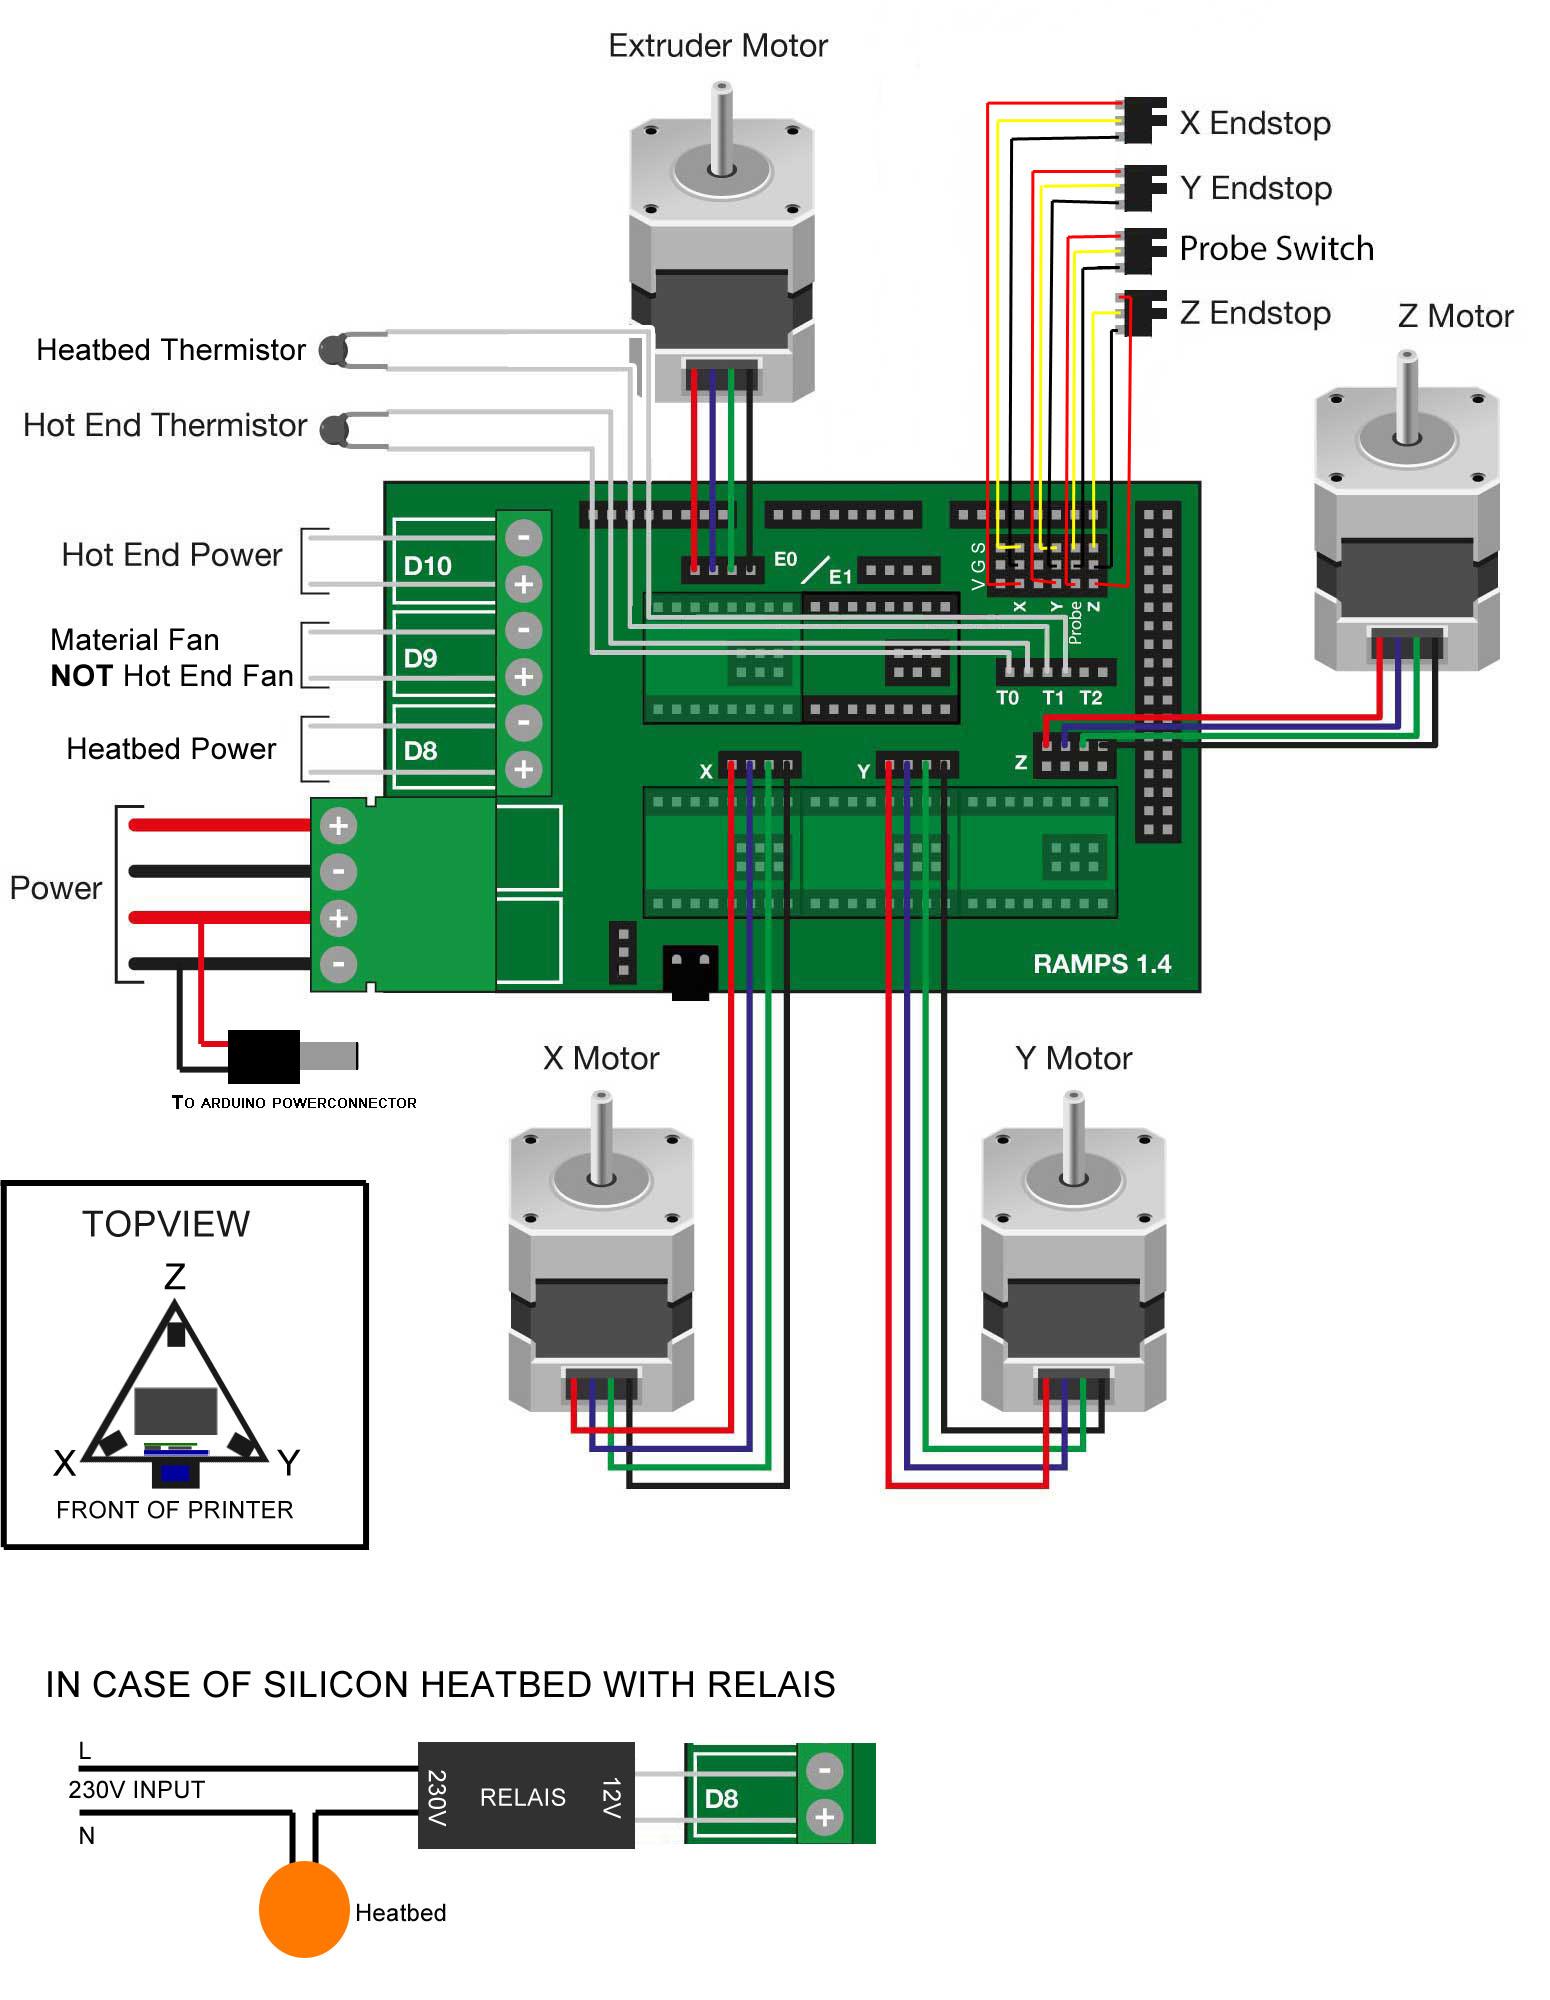 Electrical diagram Please wire all electrical wires in the printer like the image below